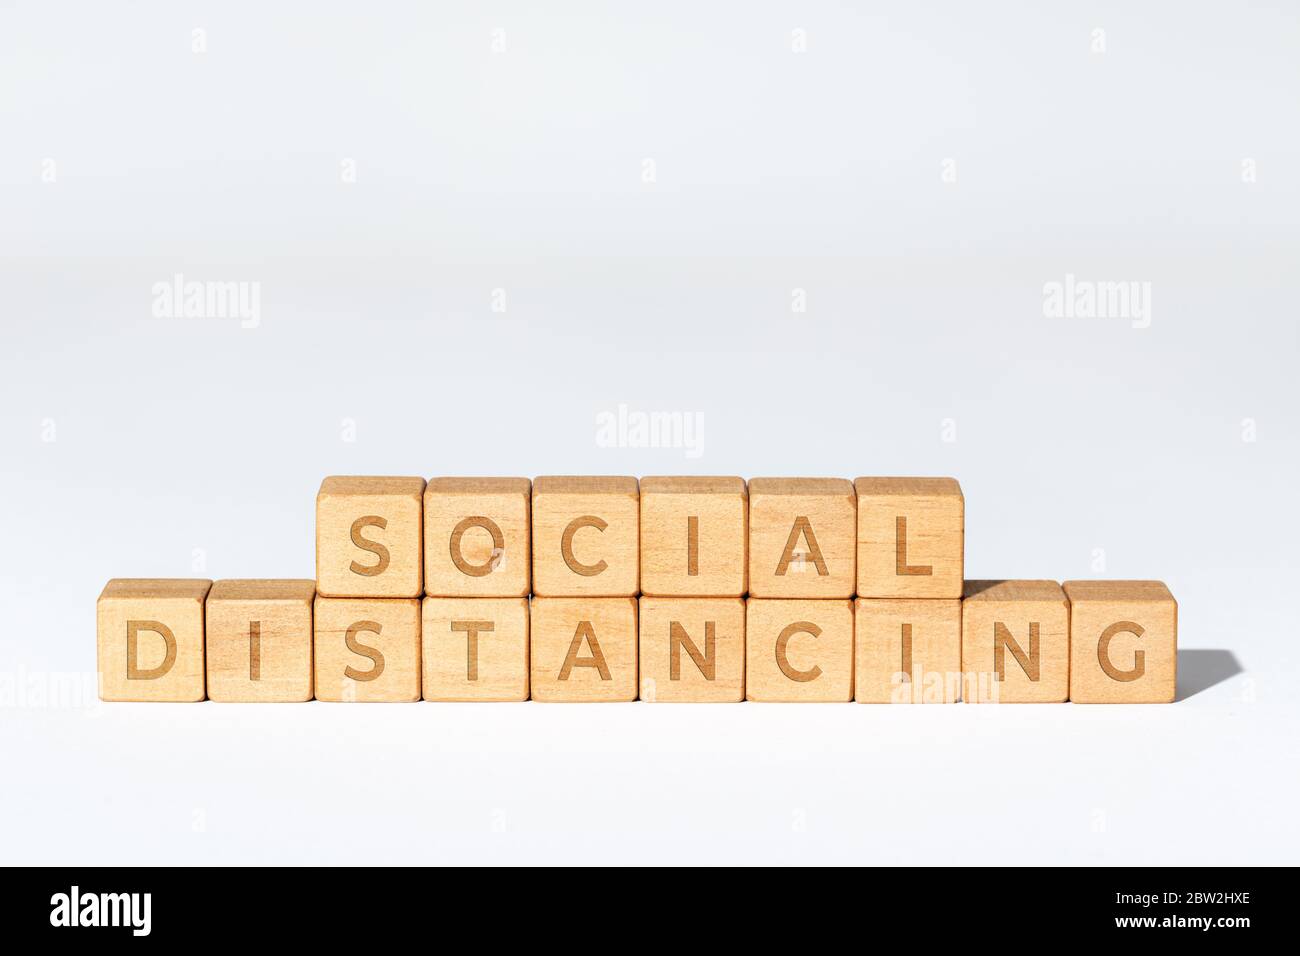 Social distancing concept. Wooden blocks with text. Coronavirus Covid-19 pandemic. White background. Copy space Stock Photo